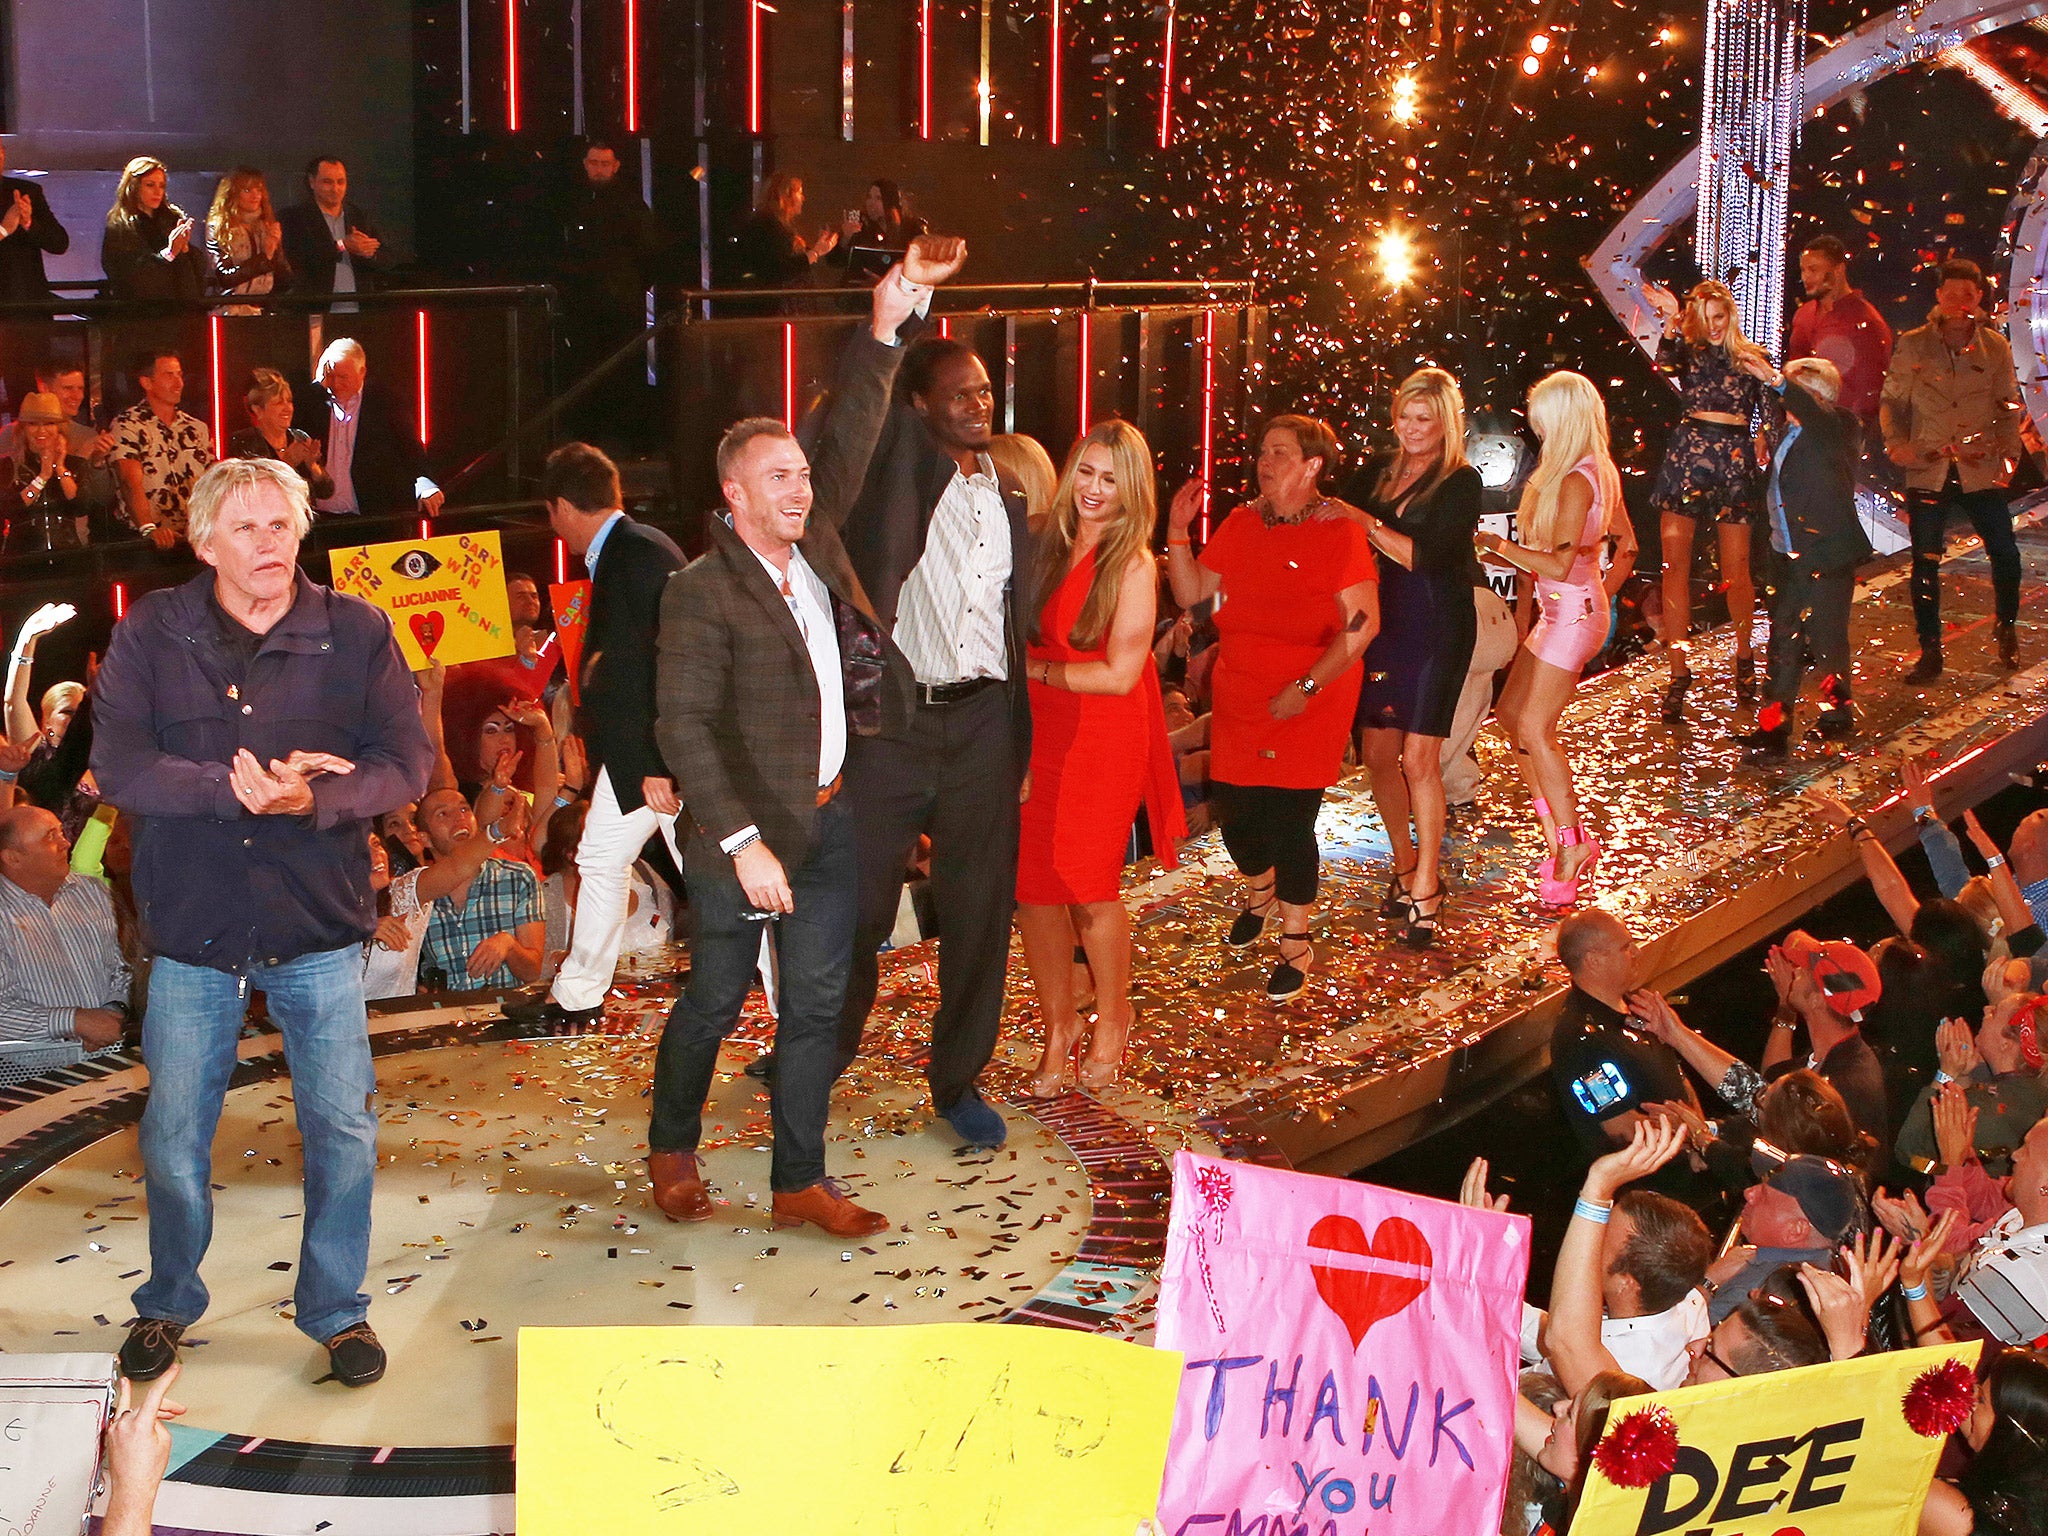 Contestants during this summer's Celebrity Big Brother grand finale